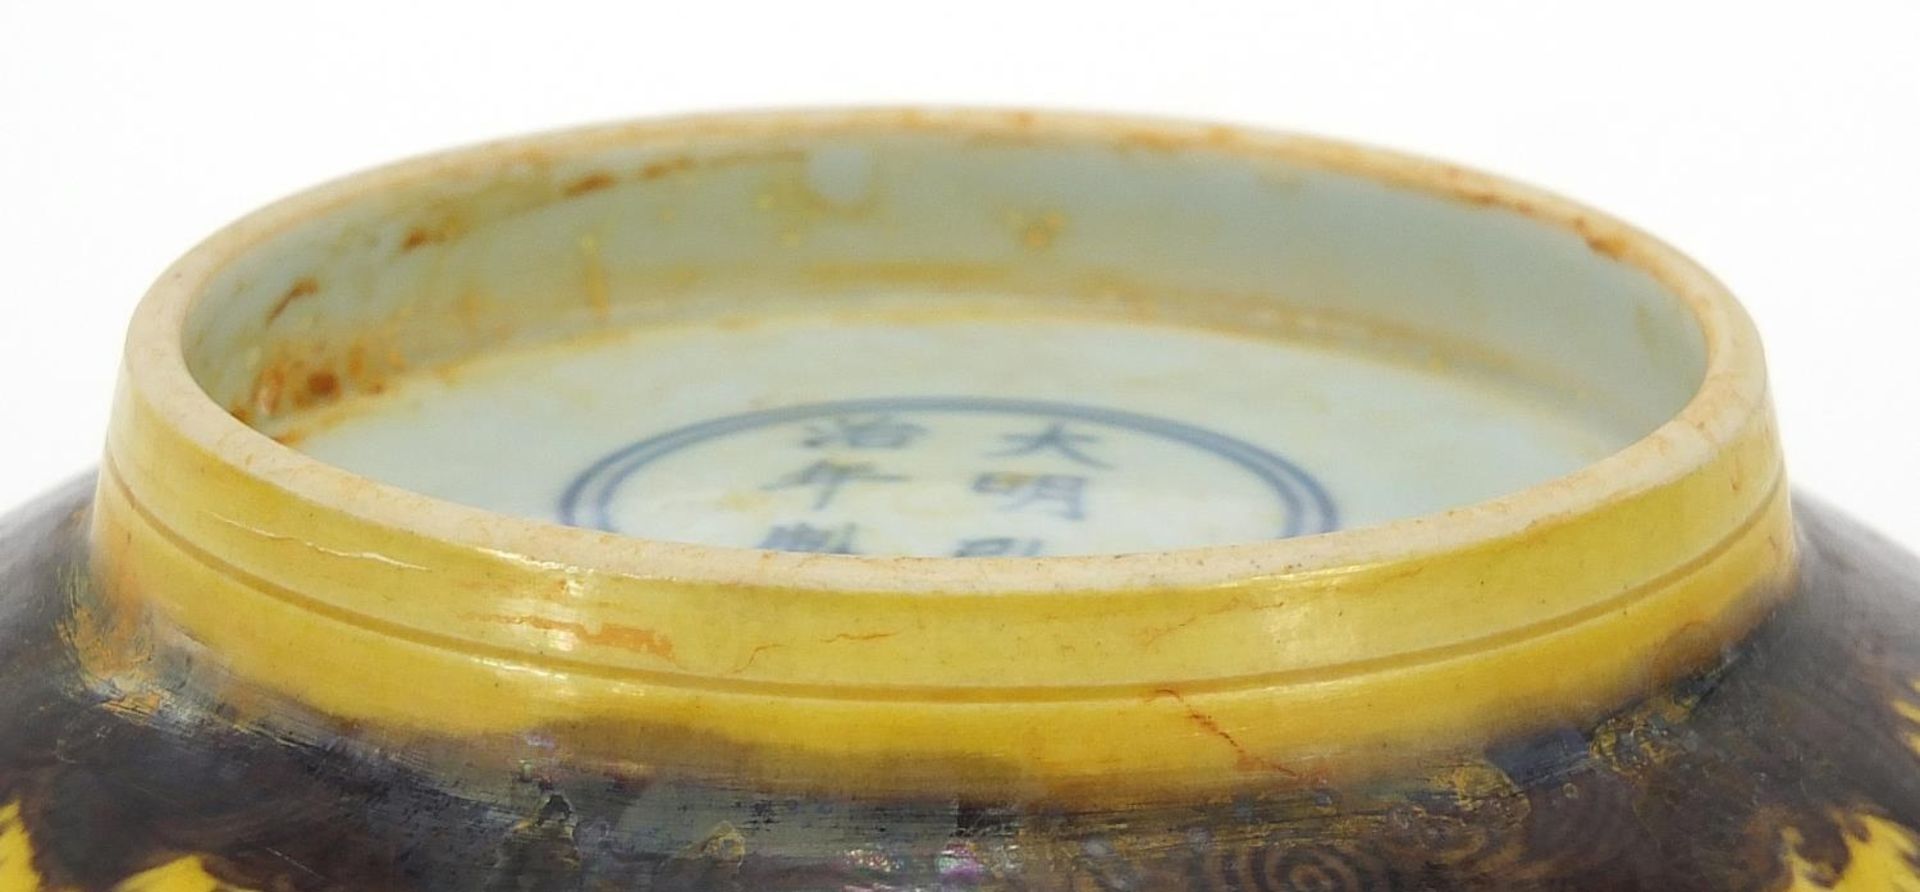 Chinese yellow porcelain bowl hand painted with dragons on the exterior, blue six figure character - Image 8 of 8